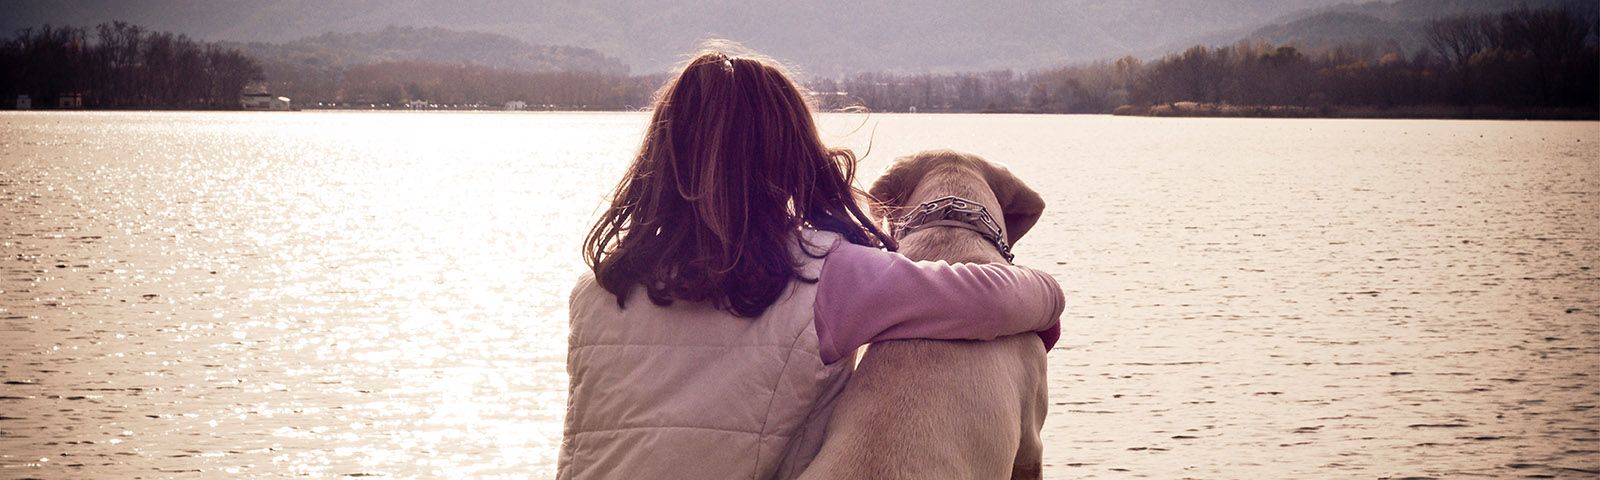 A girl hugging a dog as they look over a lake